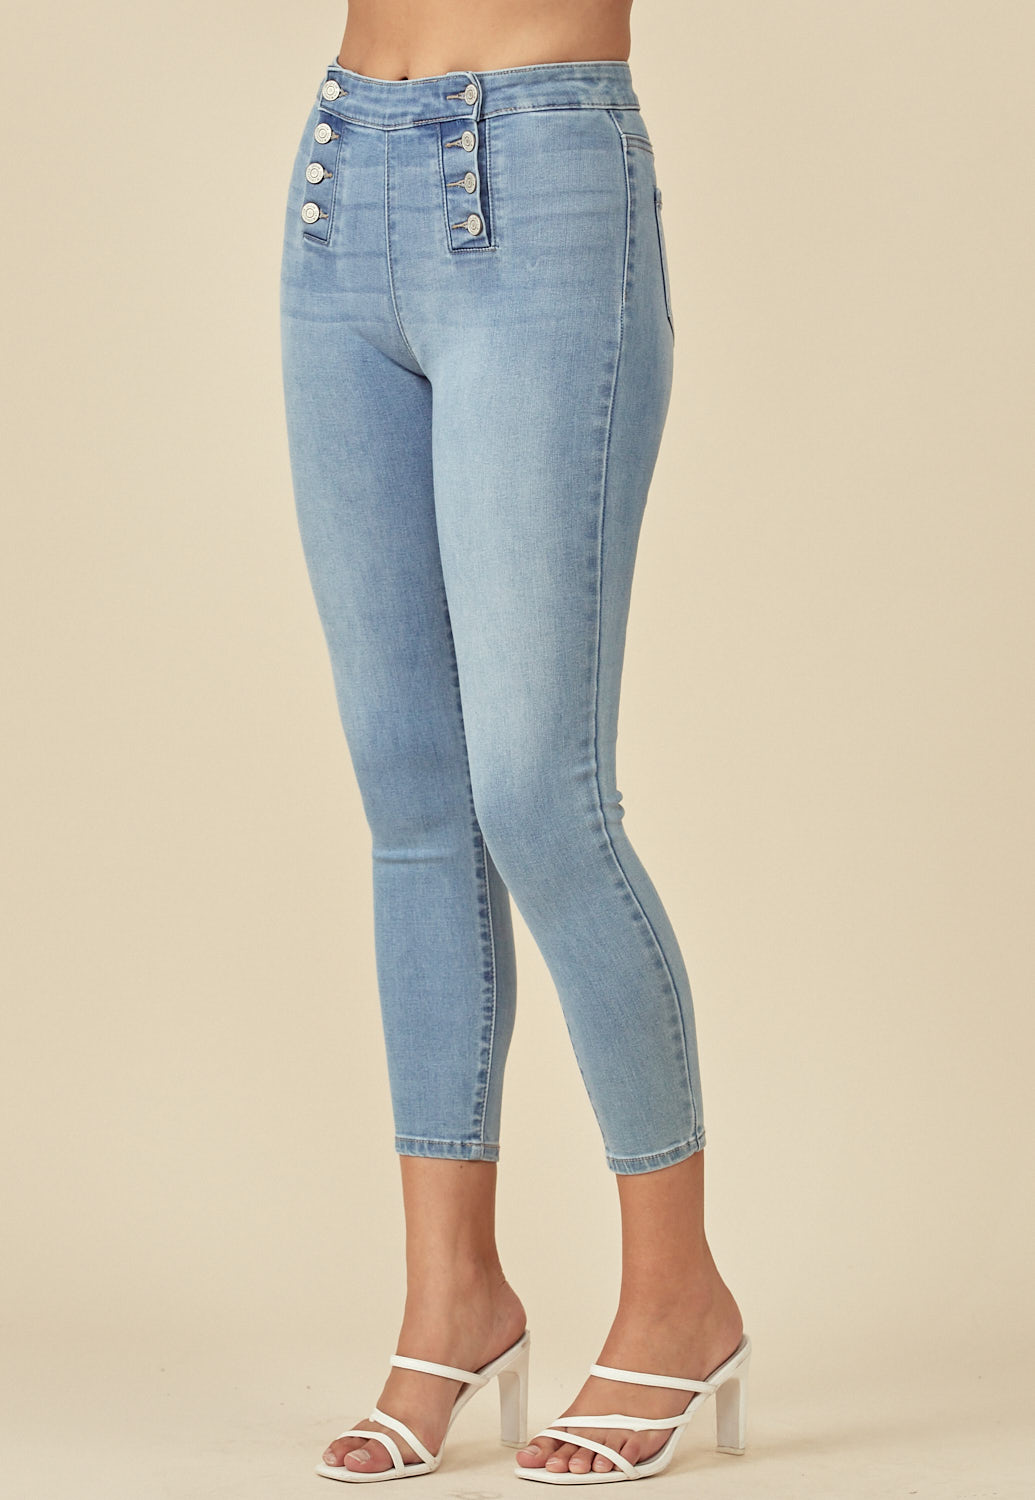 High-Rise Ankle Length Skinny Jeans 